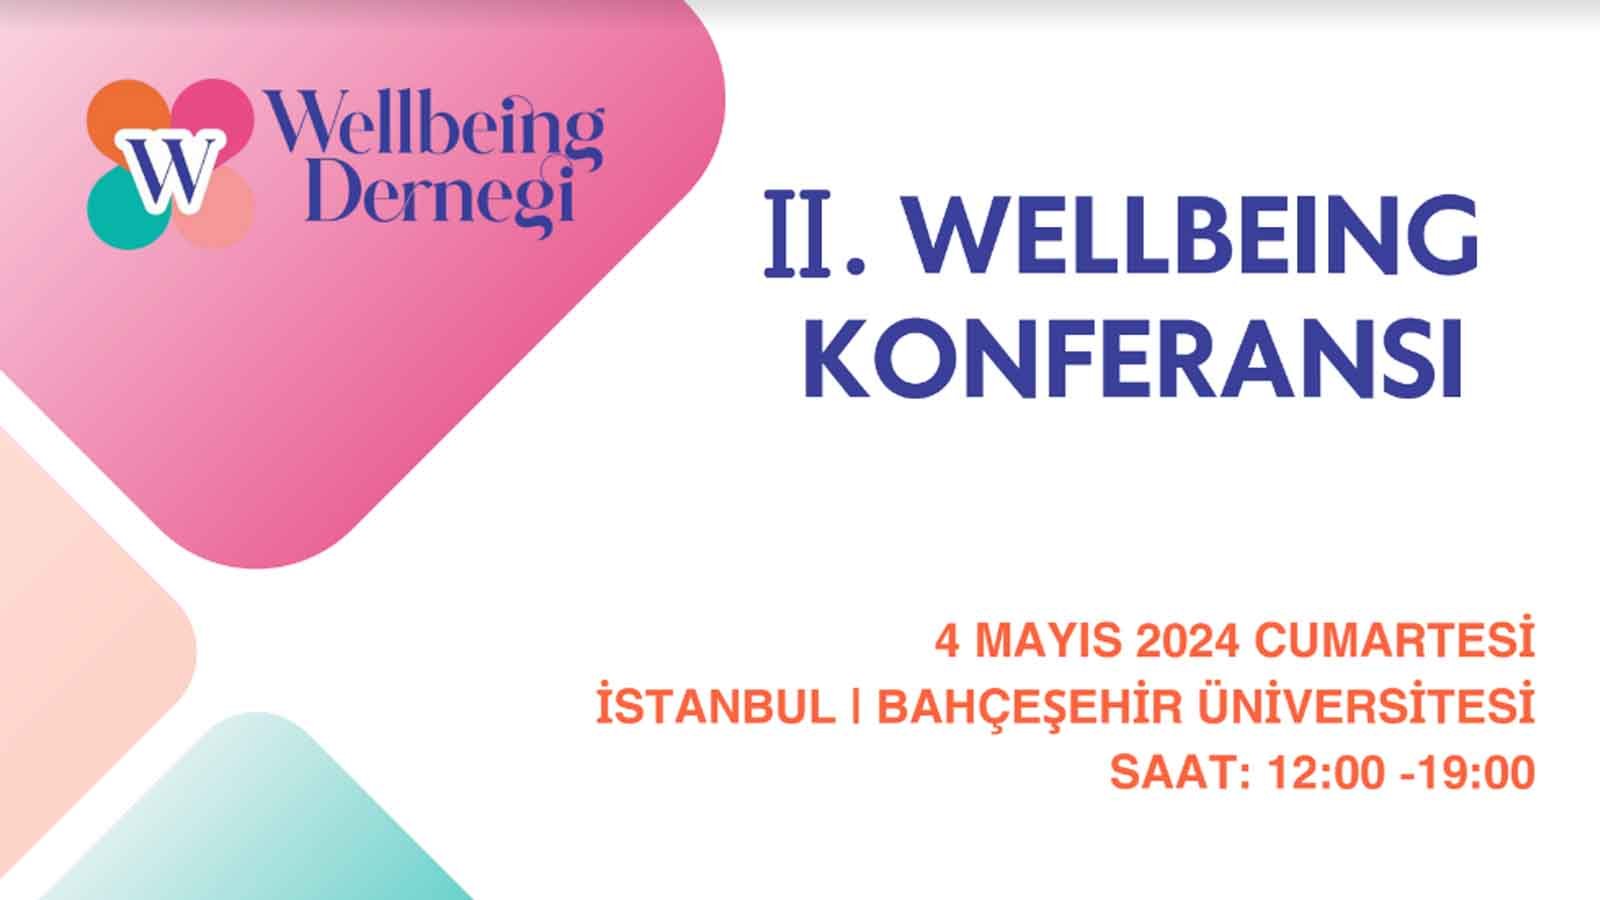 2nd Wellbeing Conference Reuniting In Istanbul On Health And Happiness!